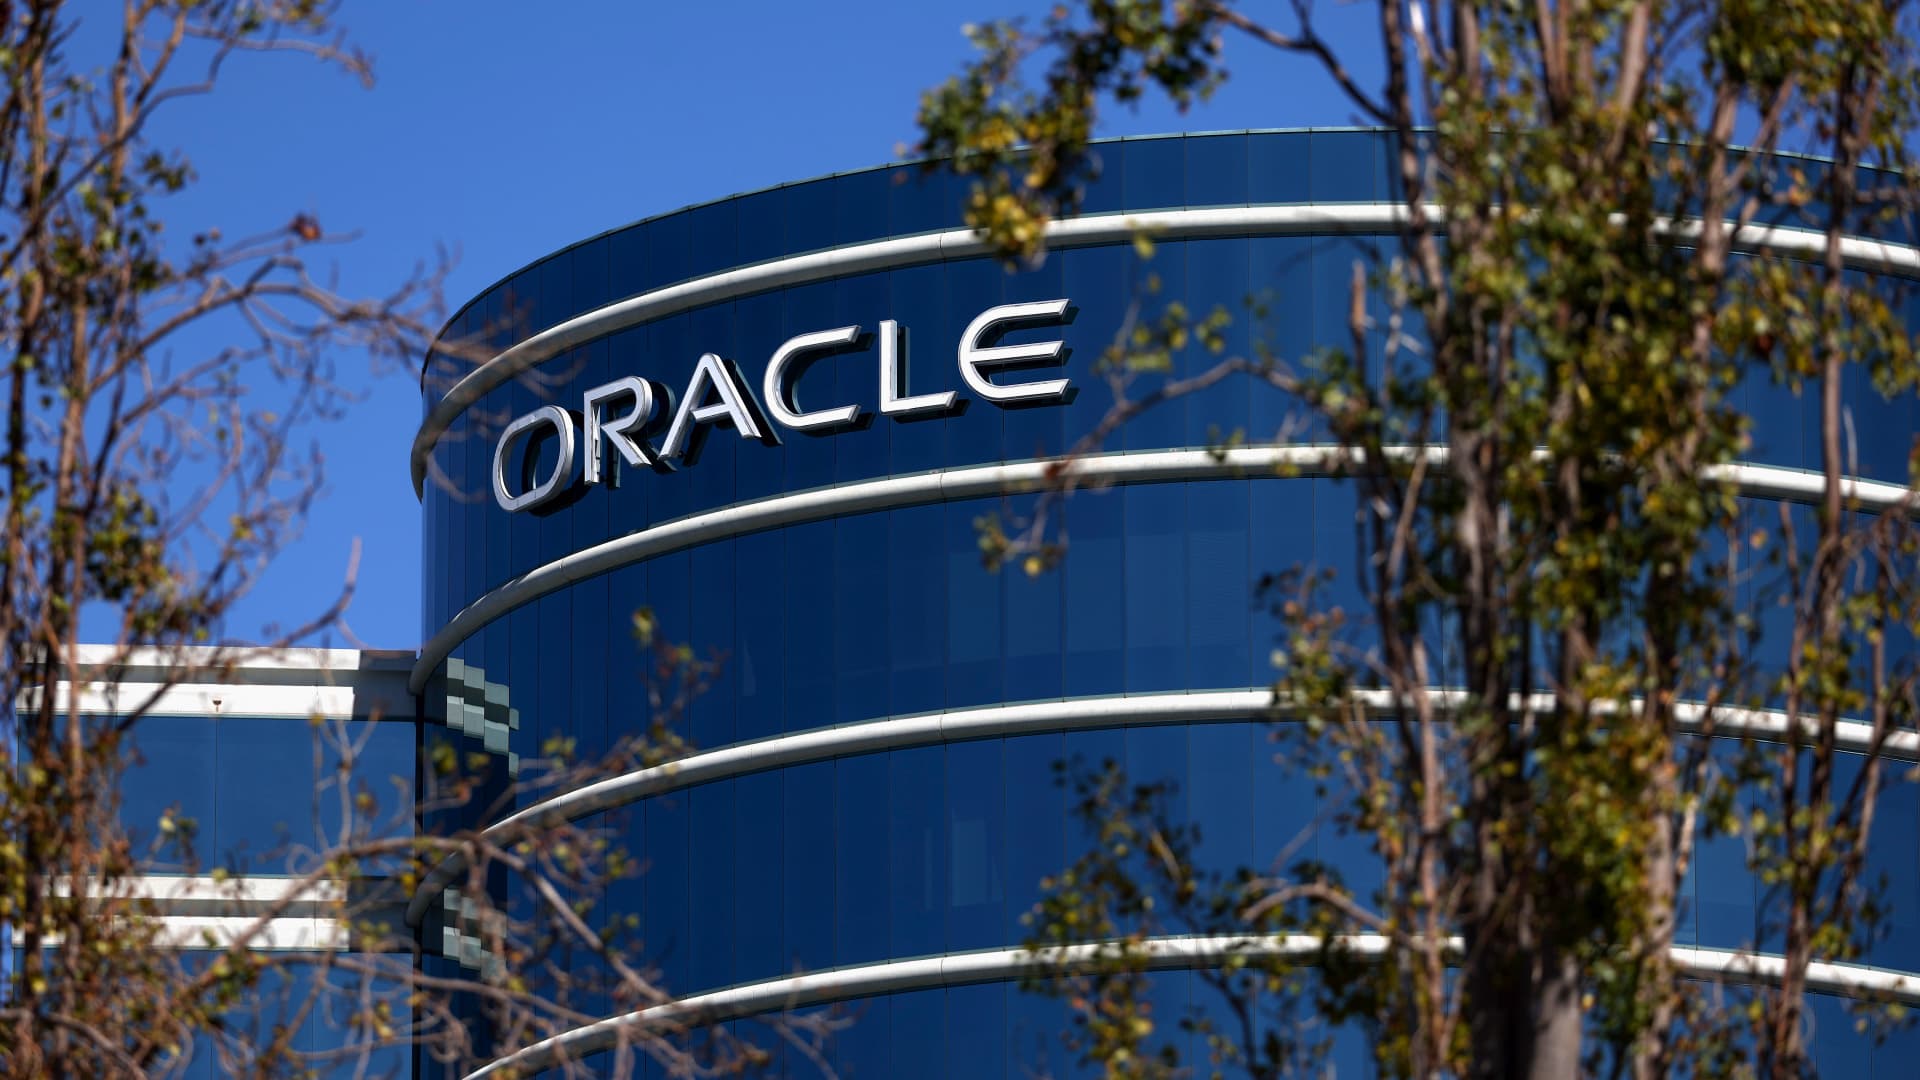 10 things to watch in the stock market Tuesday, including Oracle, Southwest [Video]